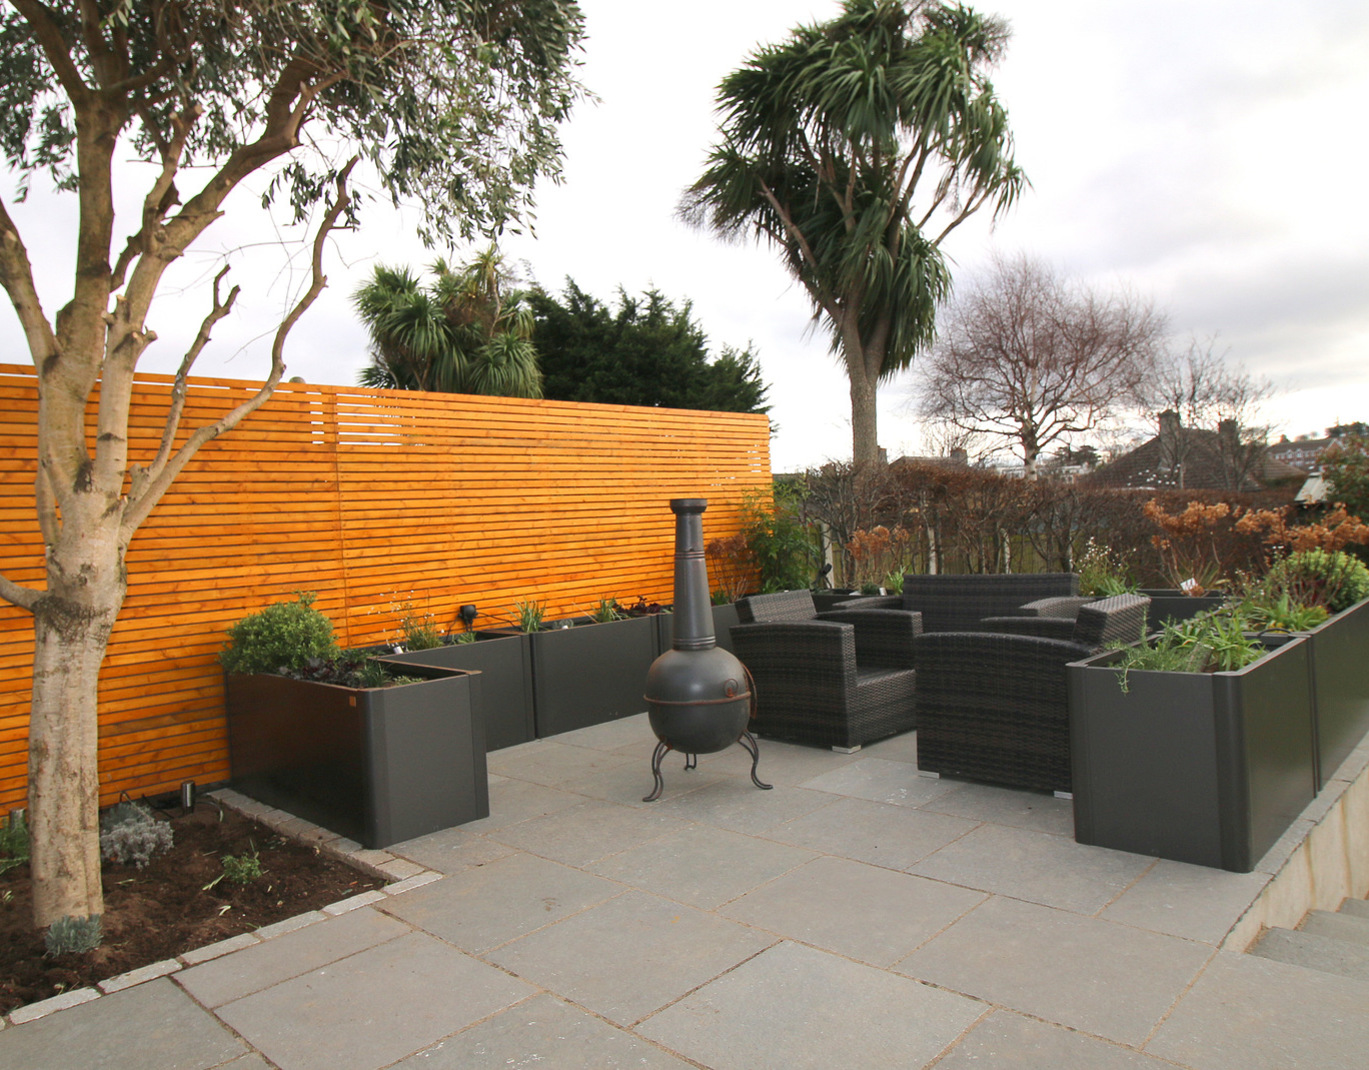 Biohort Belvedere Planters - exceptional quality, modern steel garden planters | Supplied + Fitted in Mount Merrion, Co Dublin.